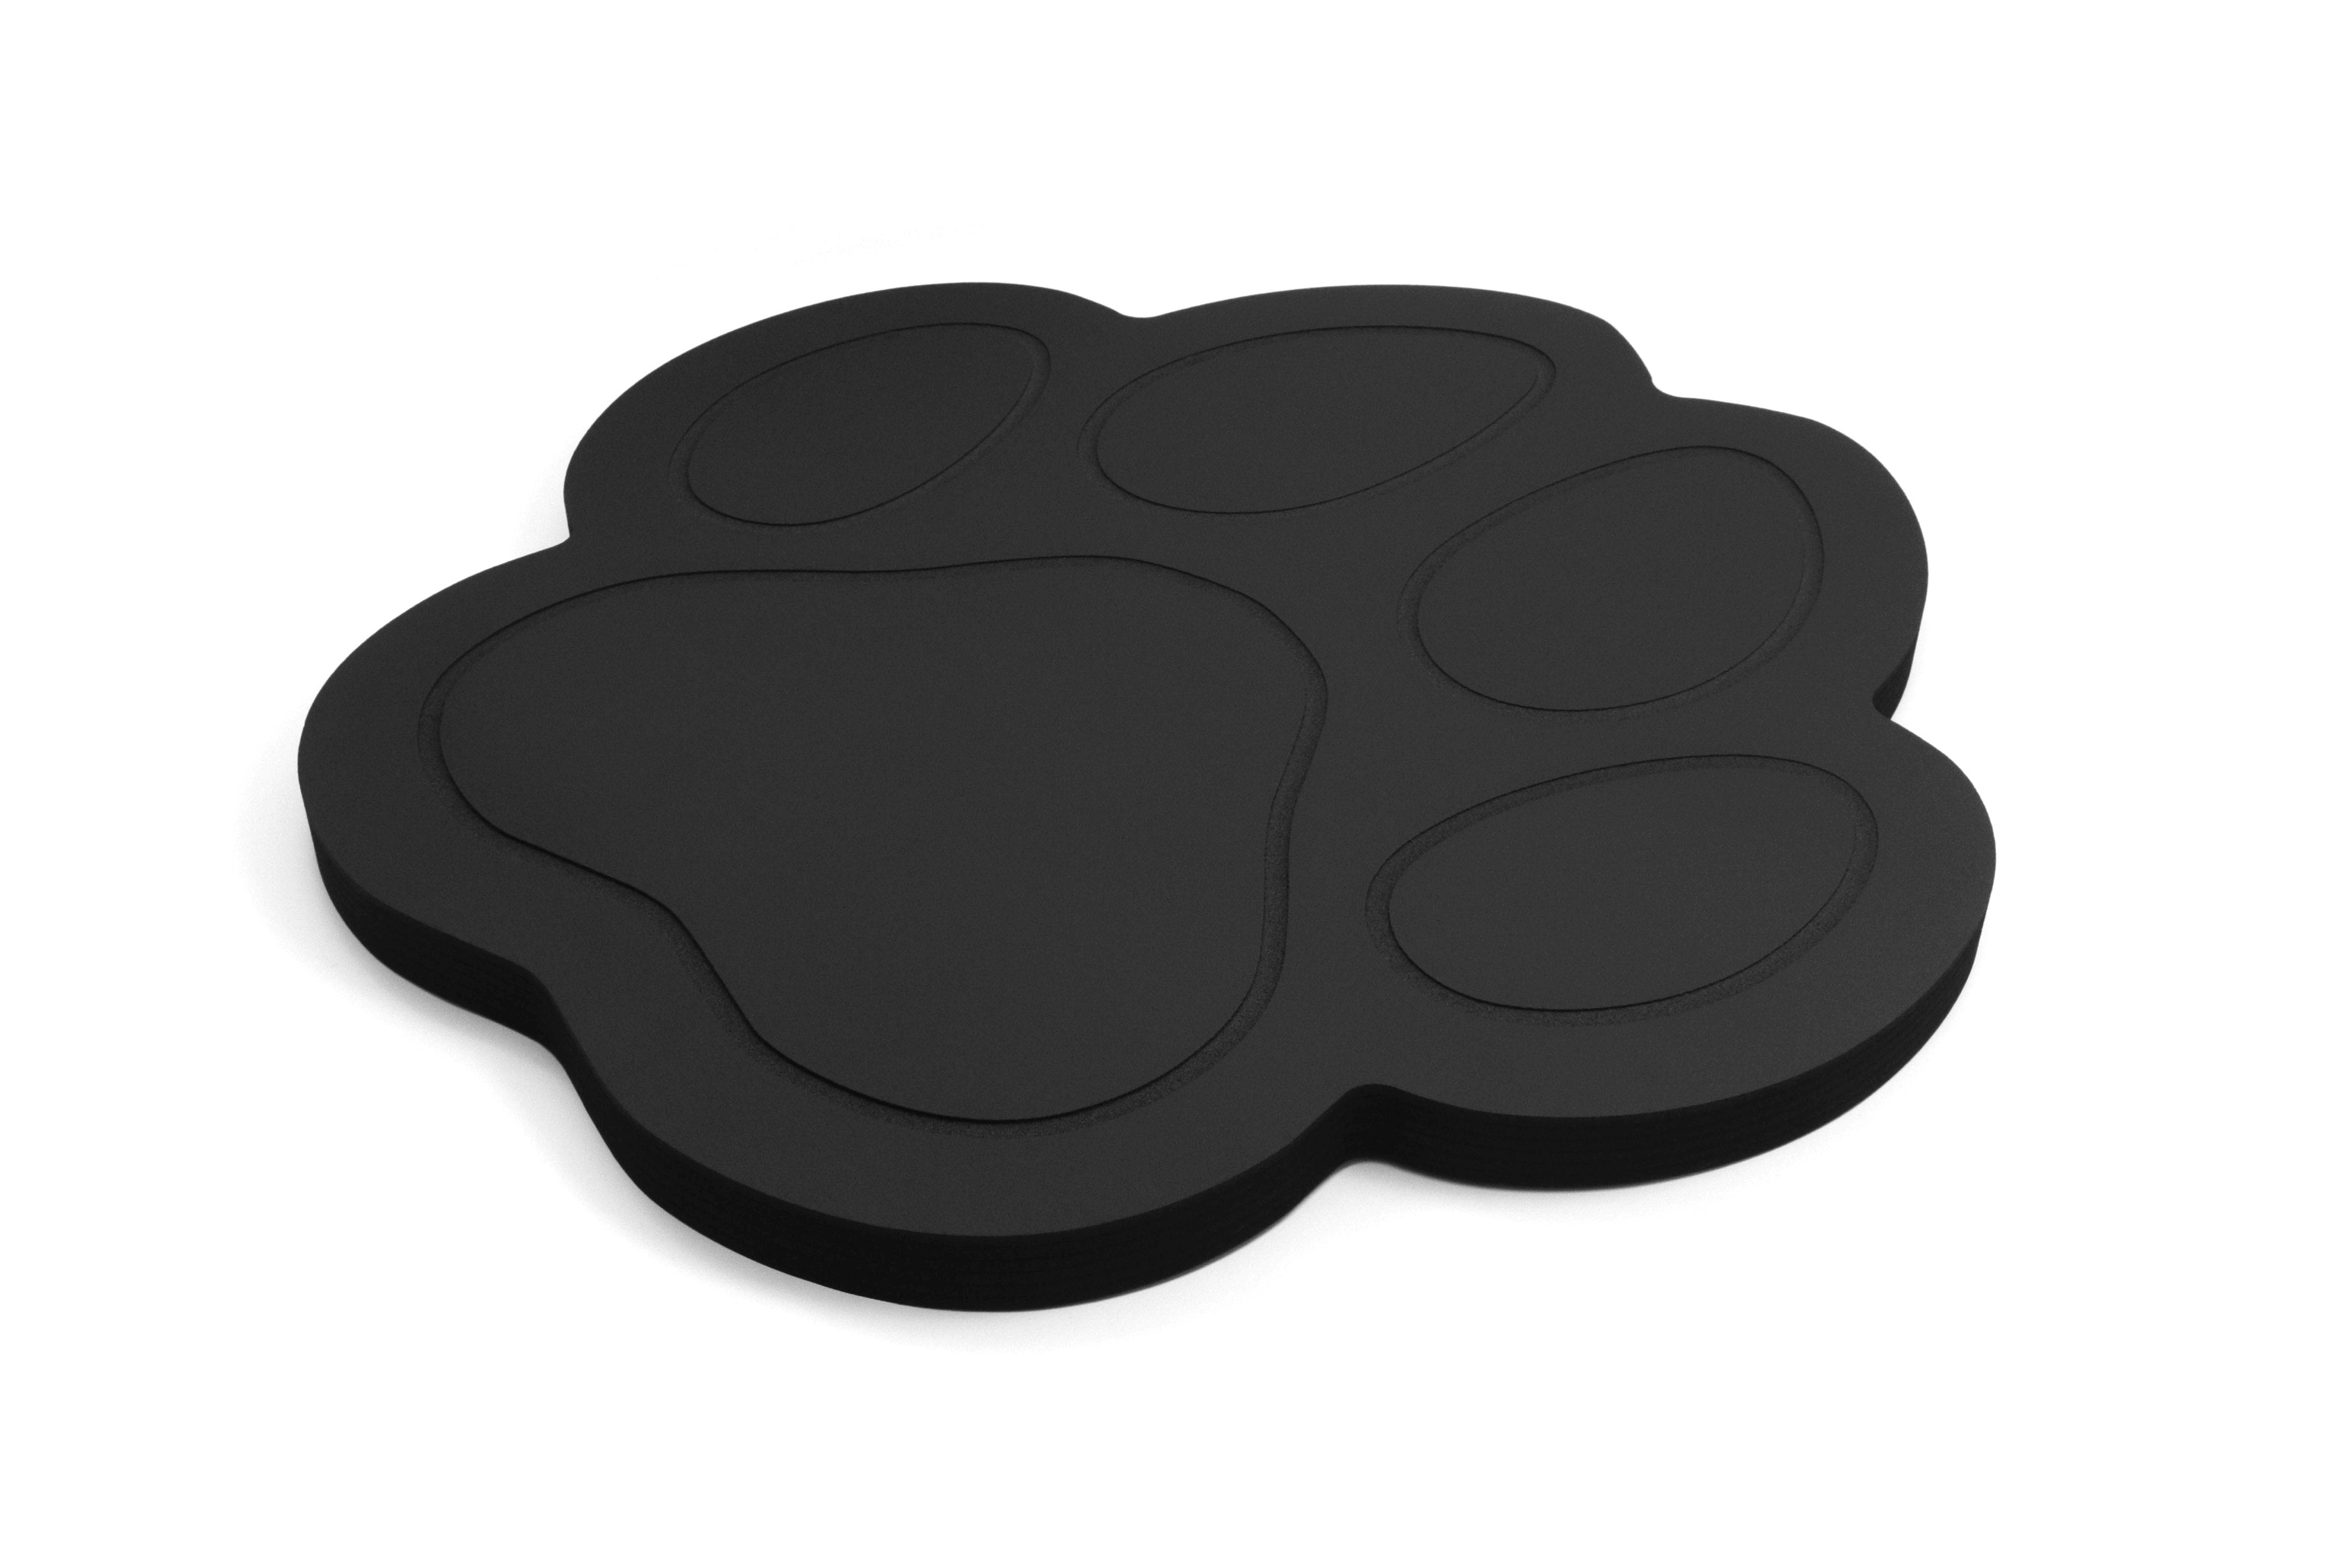 Floating Paw Print Lounging Pool Float 40"